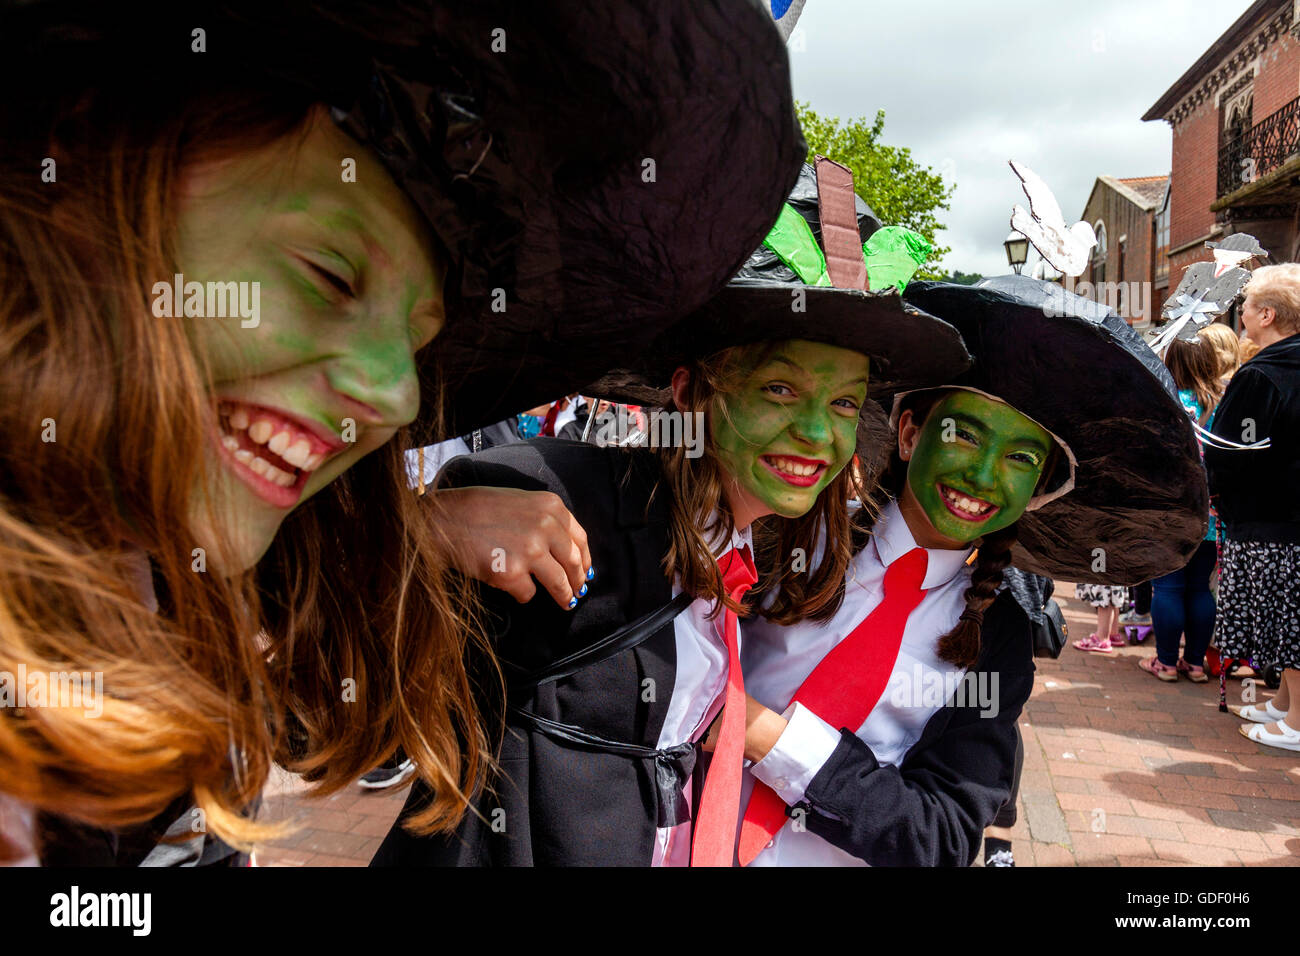 Two Girls In Costume Pose For A Photo During The Annual Lewes Schools 'Moving On' Parade, High Street, Lewes, East Sussex, UK Stock Photo